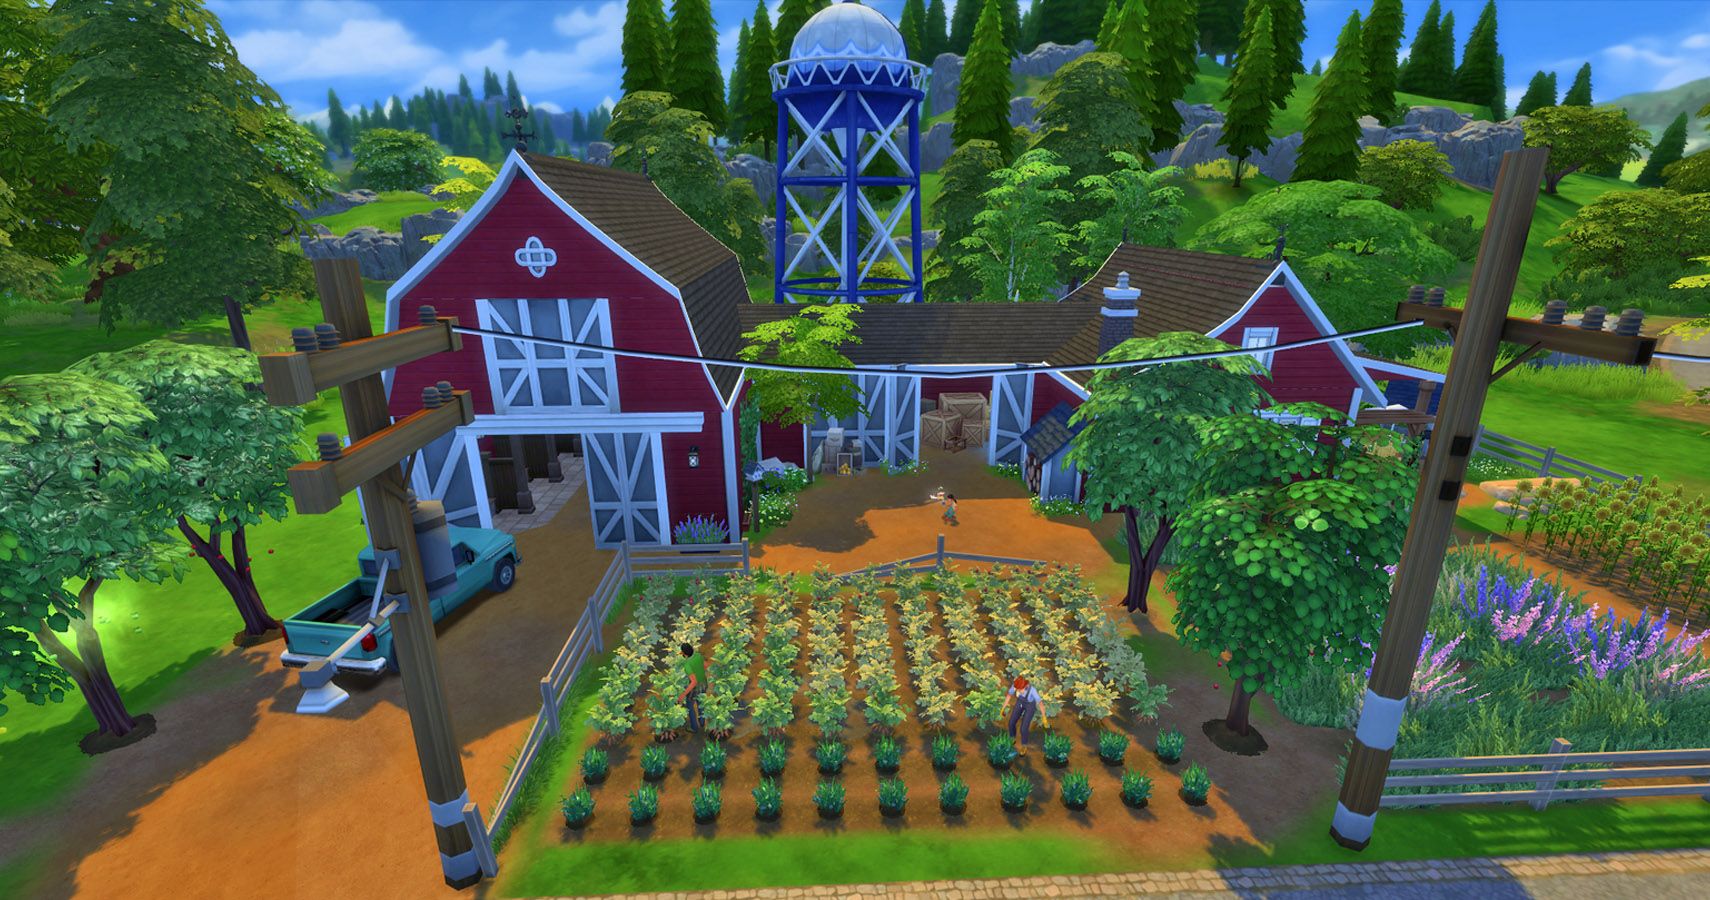 Sims 4 8 Reasons Why The Next Expansion Should Be Farming And 7